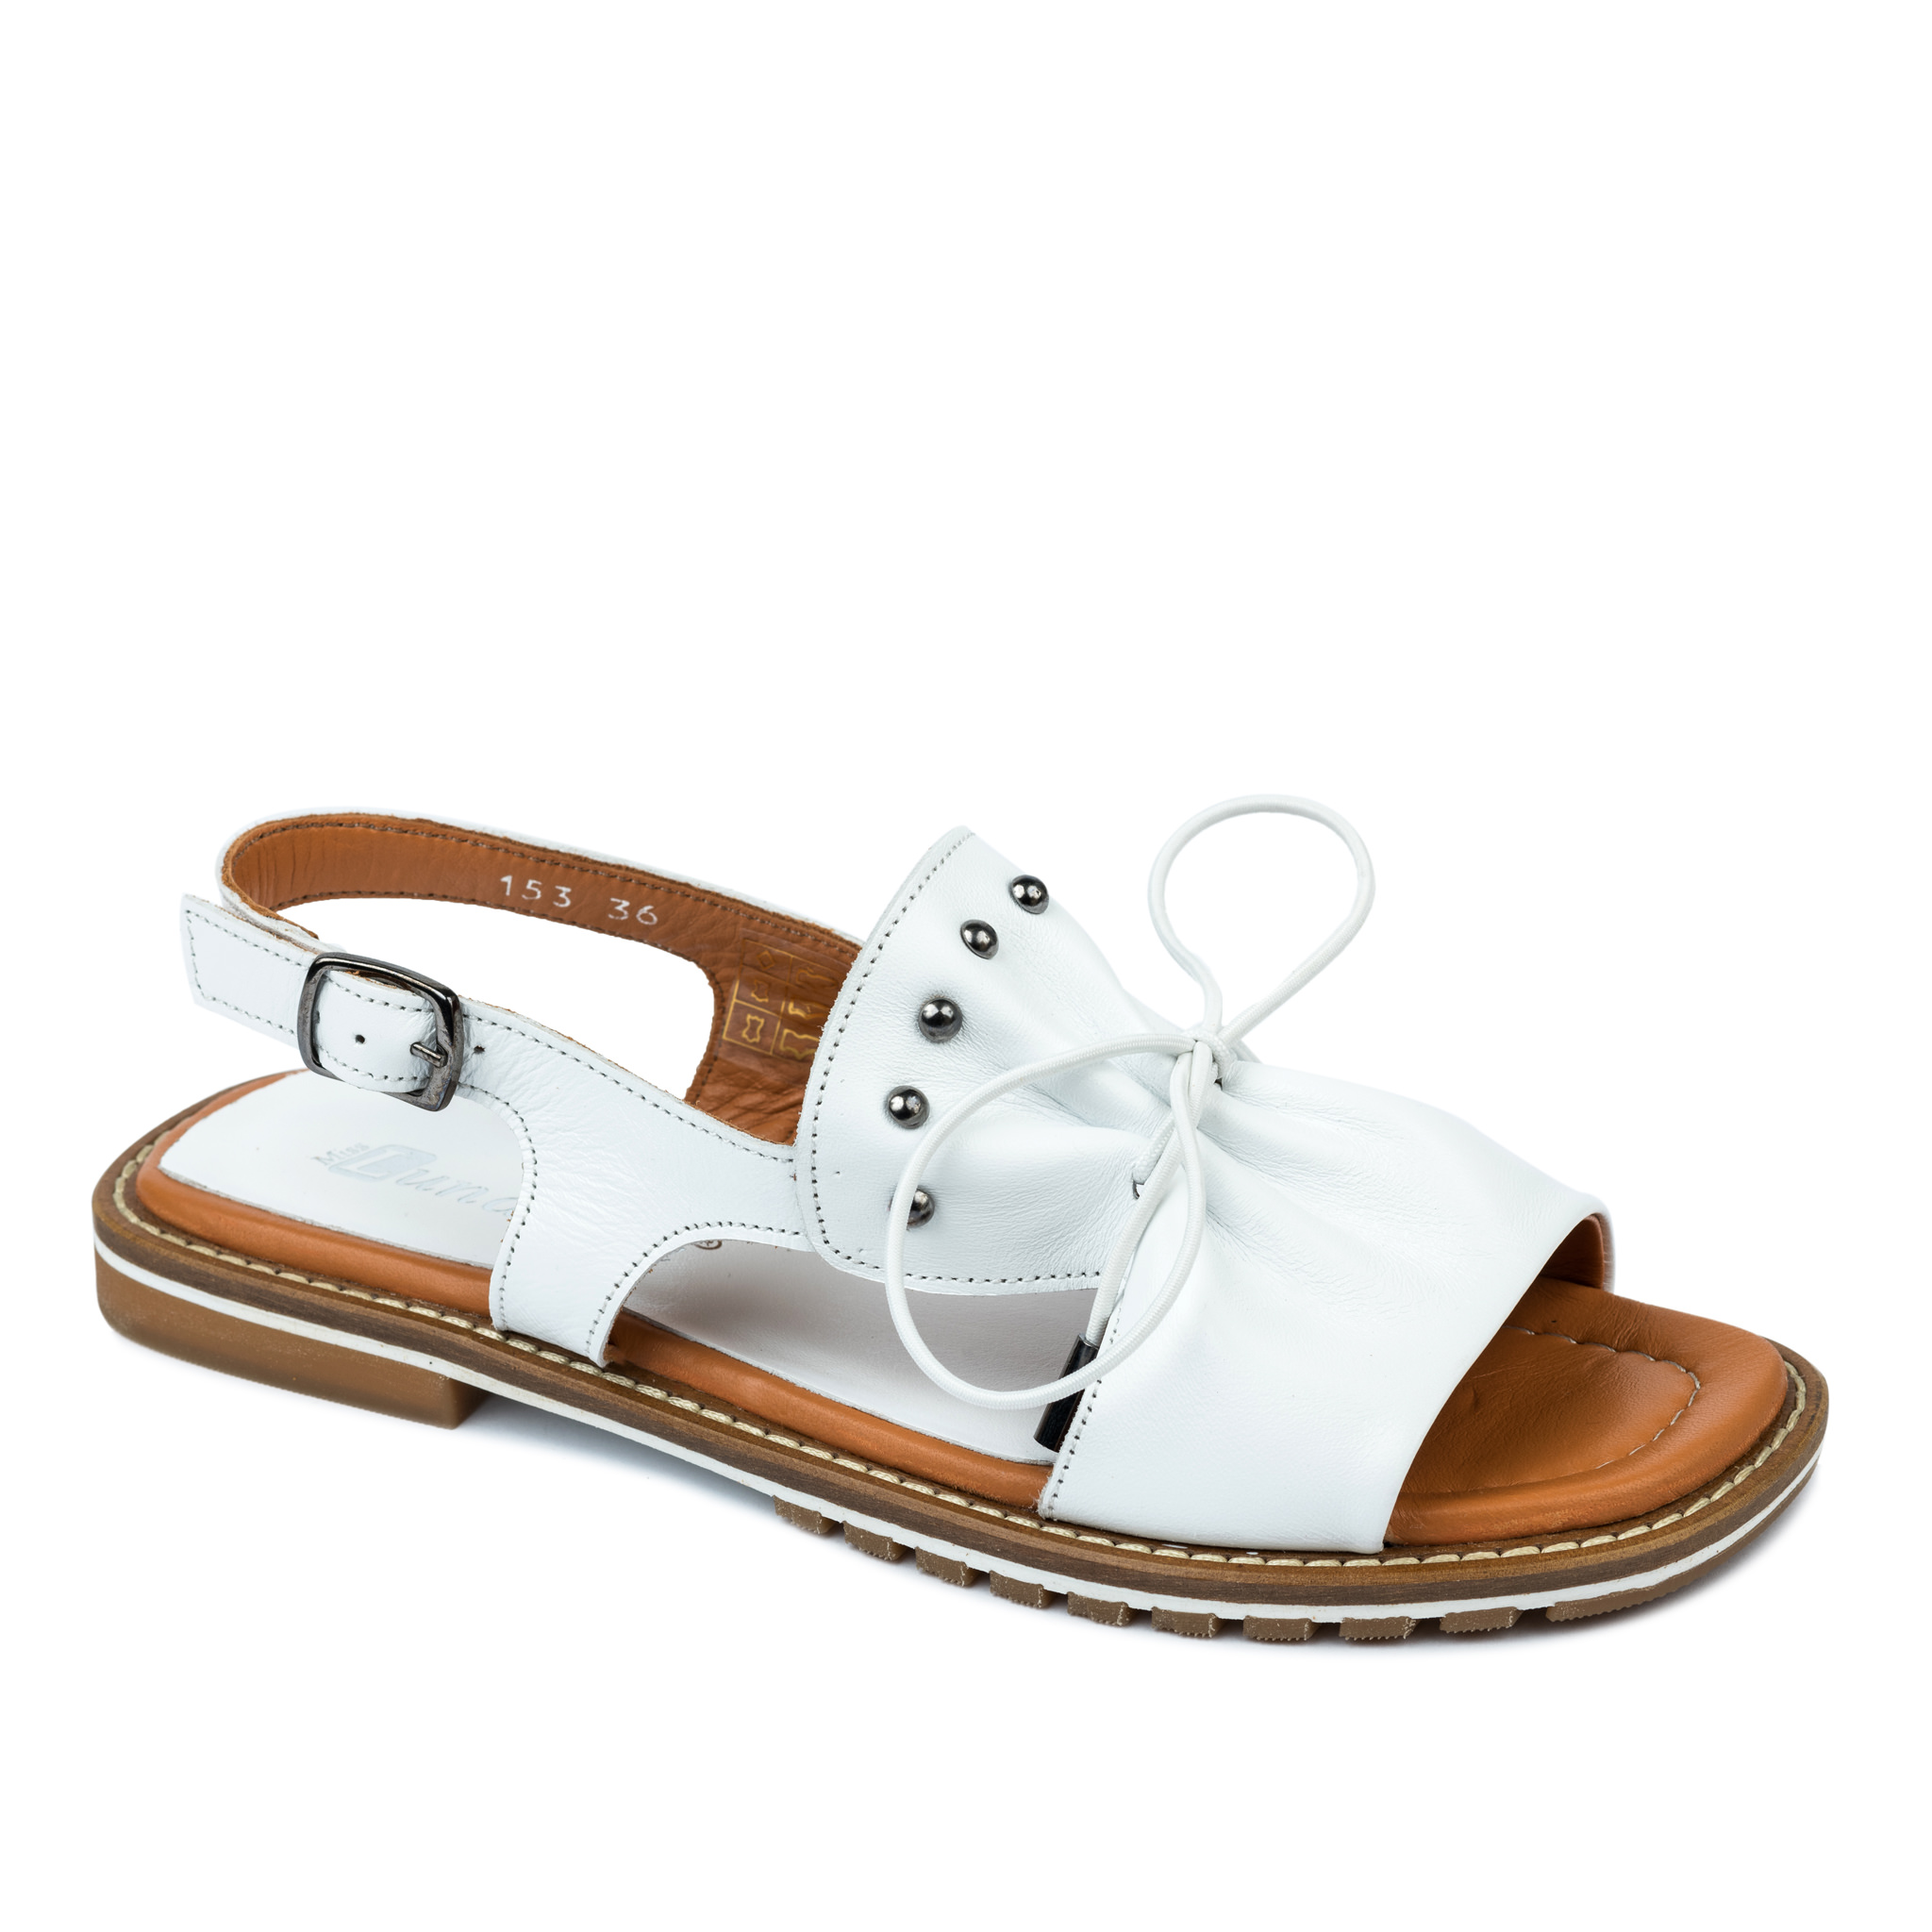 Leather sandals A649 - WHITE